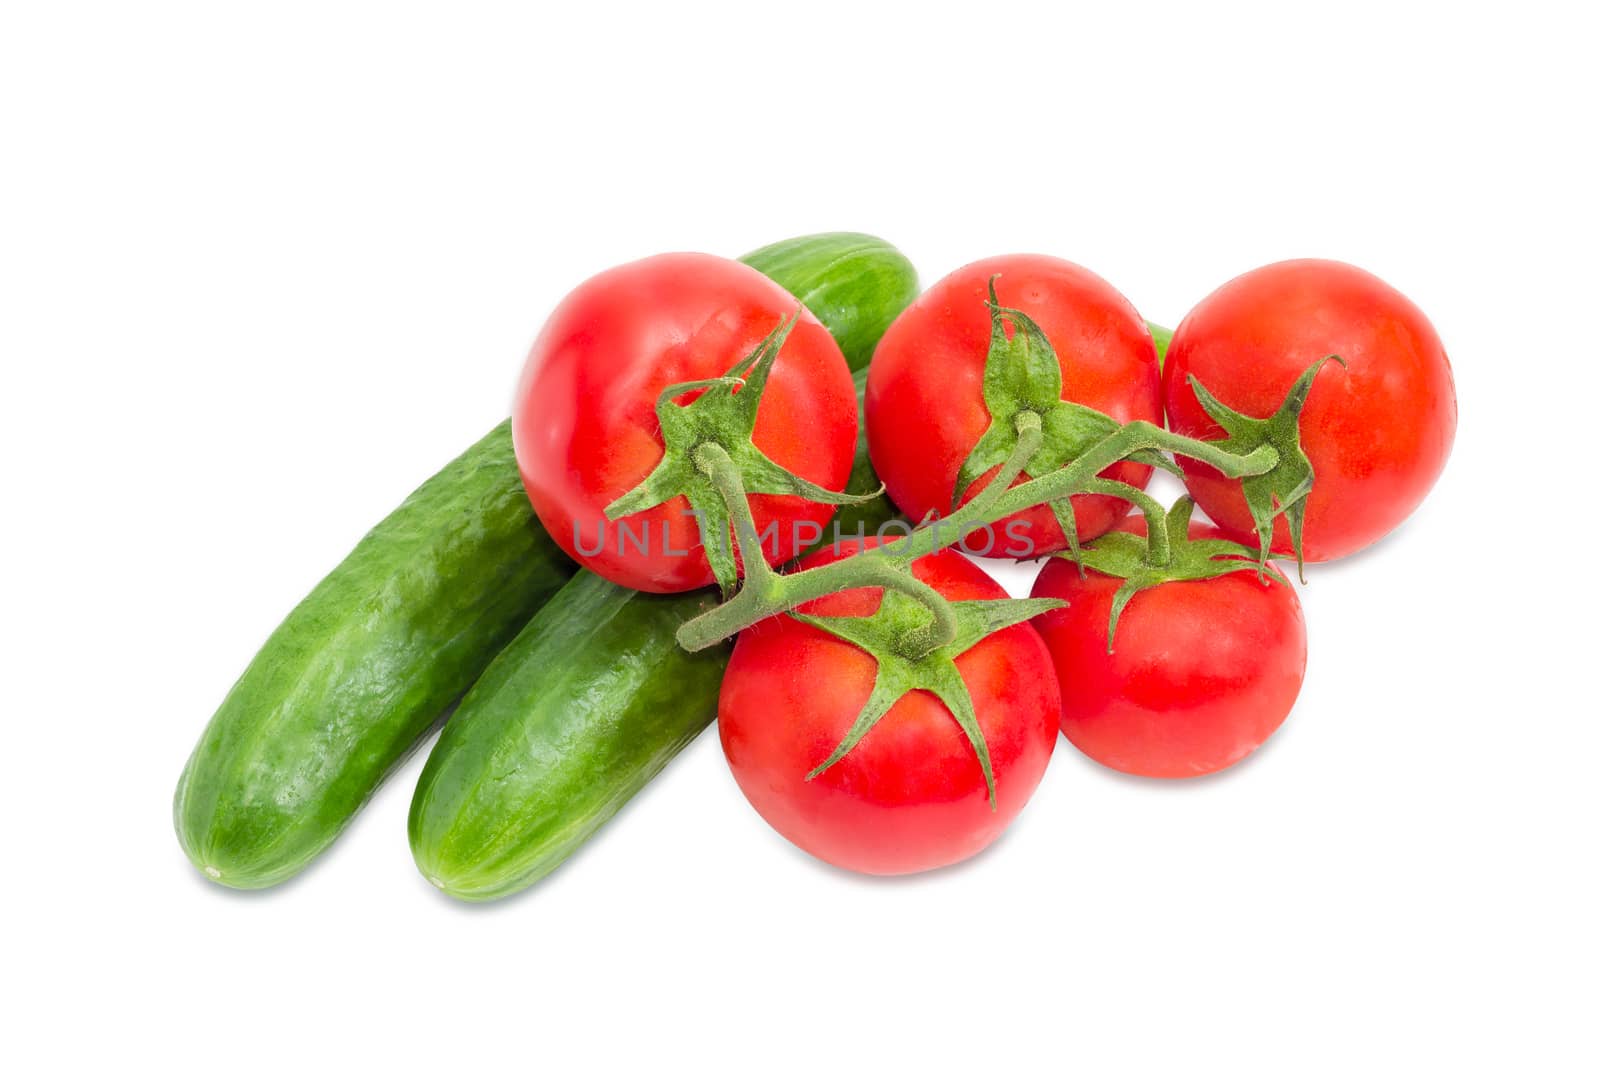 Two cucumbers and branch of the ripe red tomatoes by anmbph